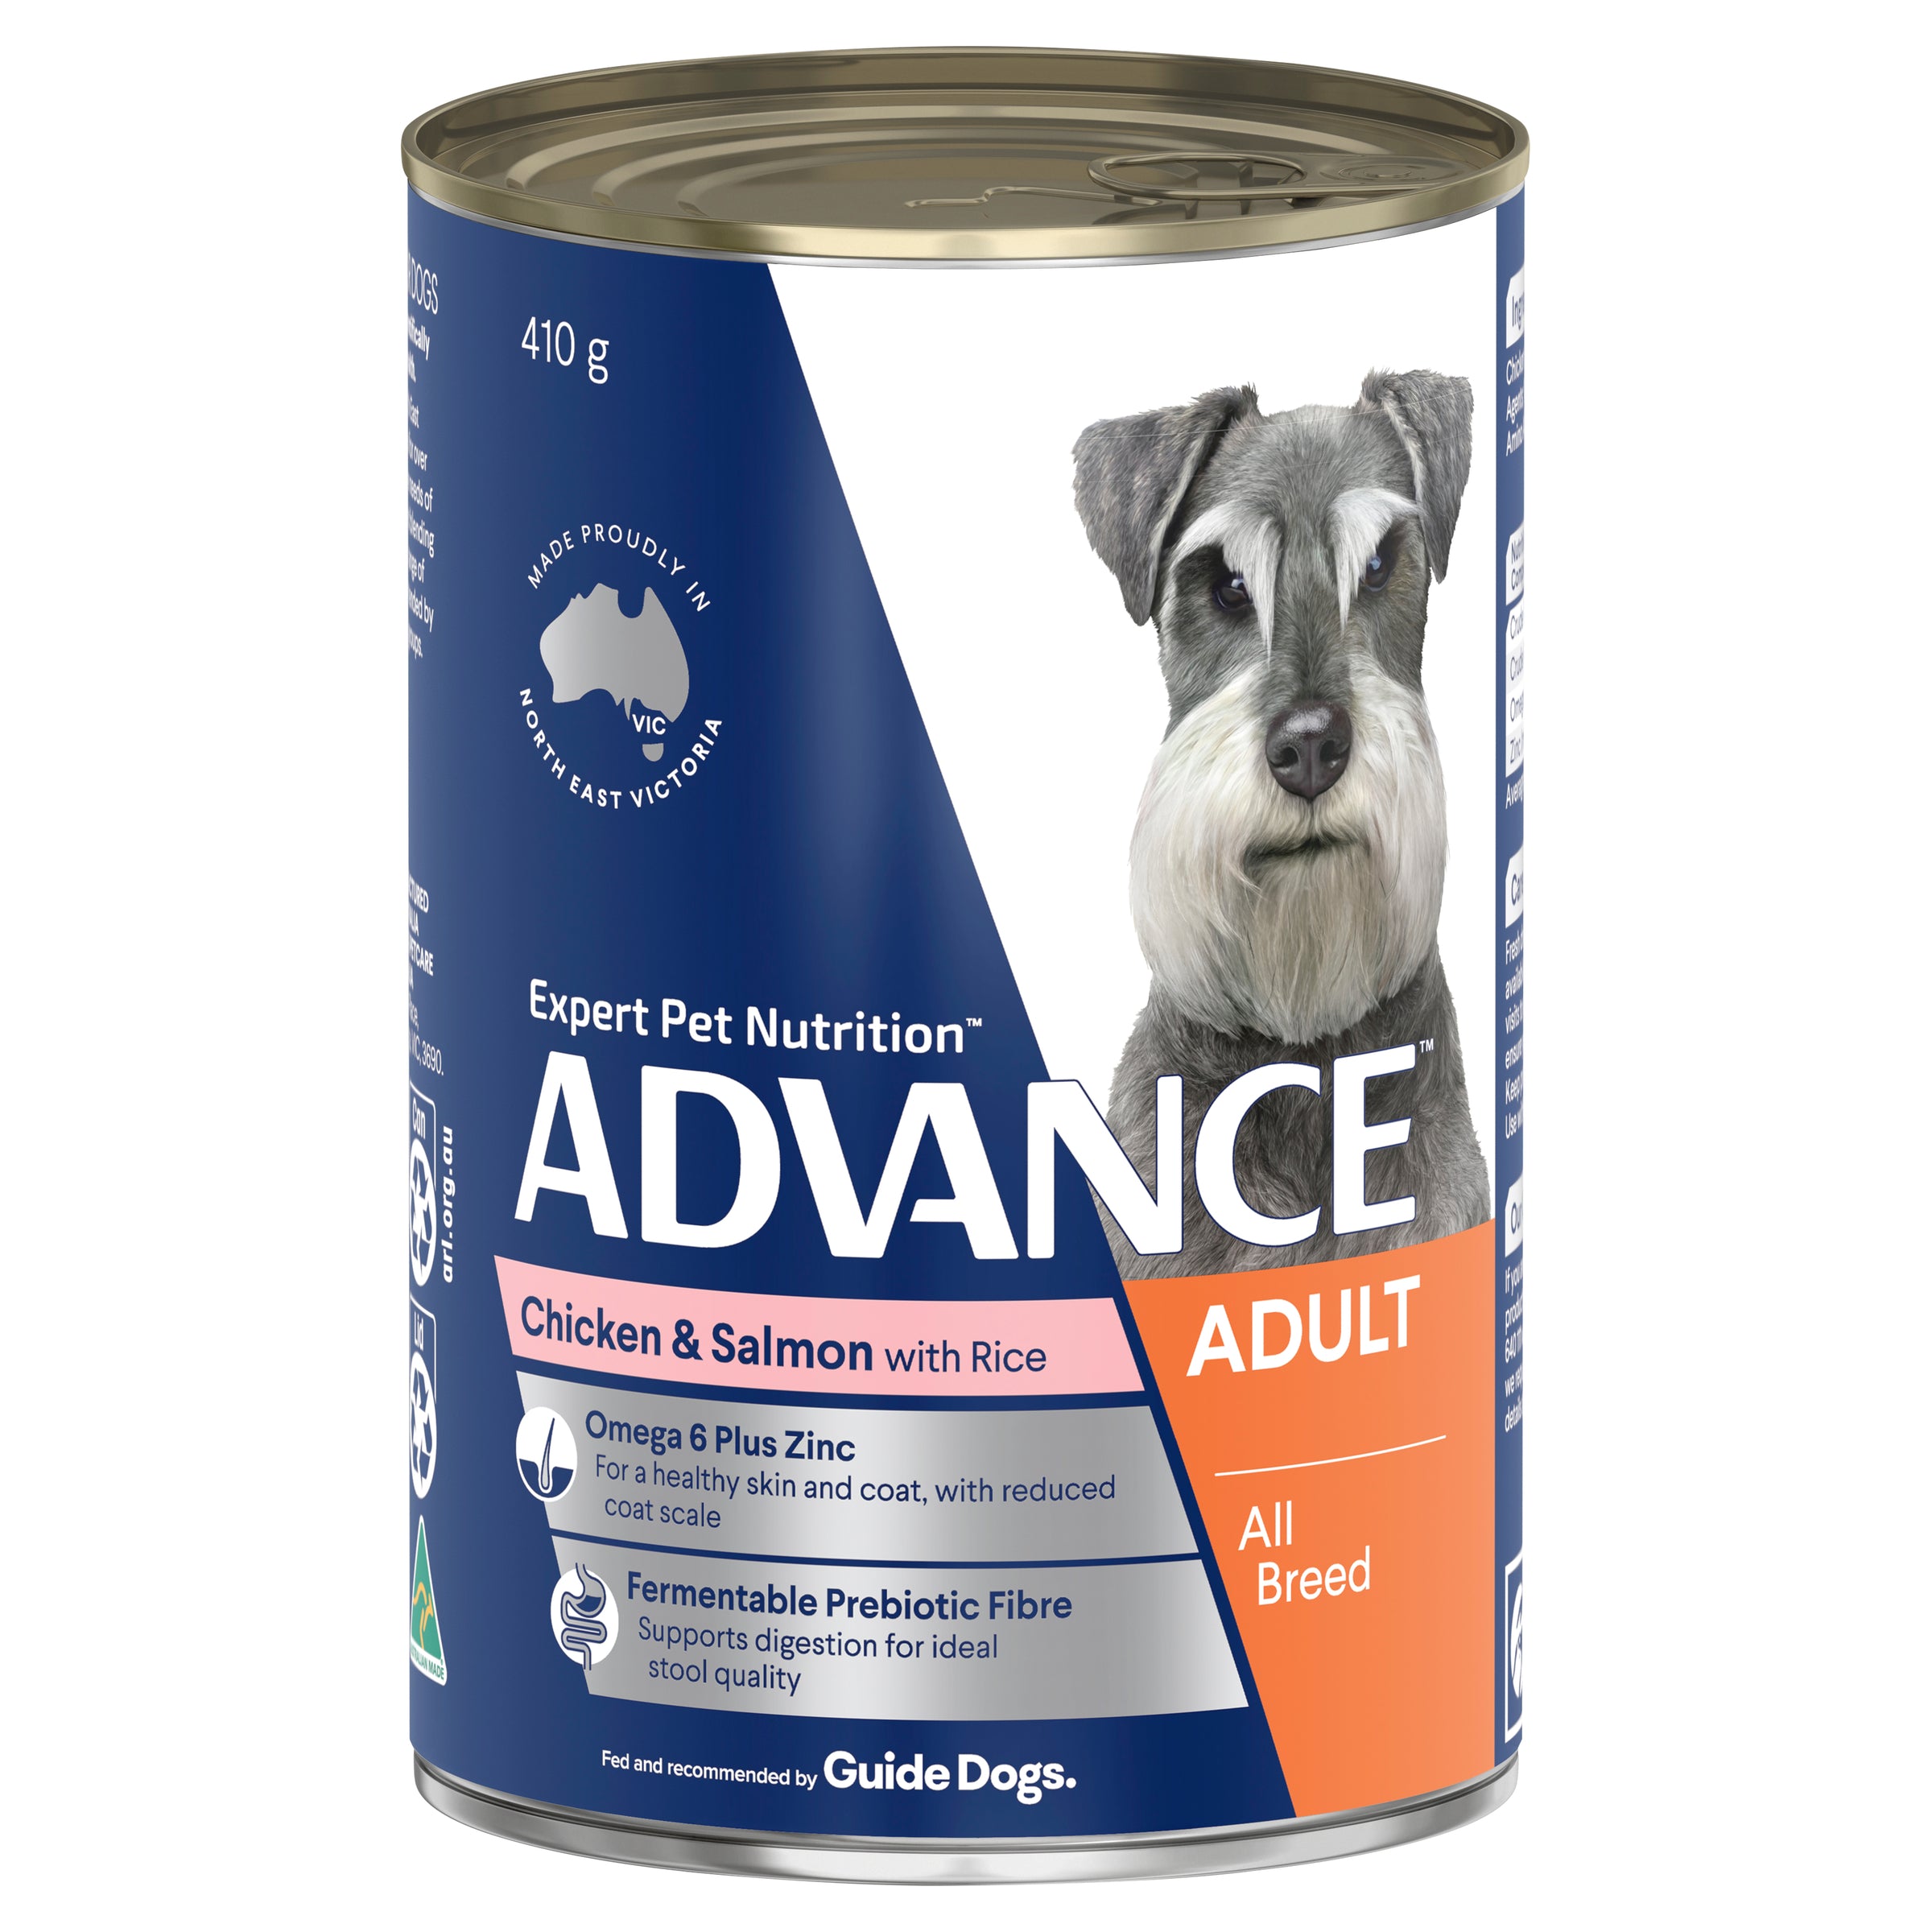 Advance All Breed Chicken & Salmon with Rice 410g